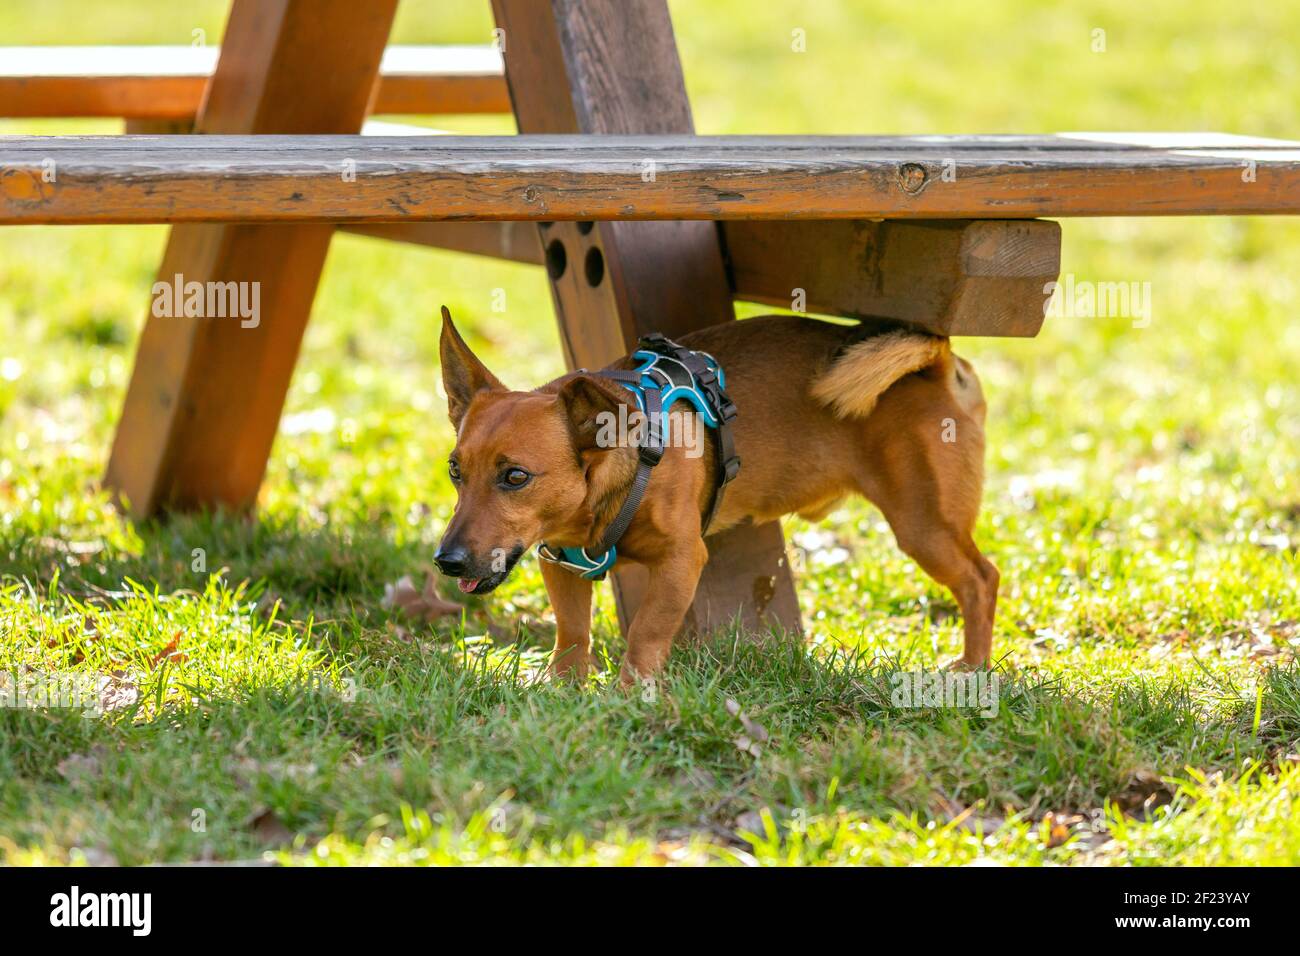 Cute small dog peeing outdoors onto a bench Stock Photo - Alamy